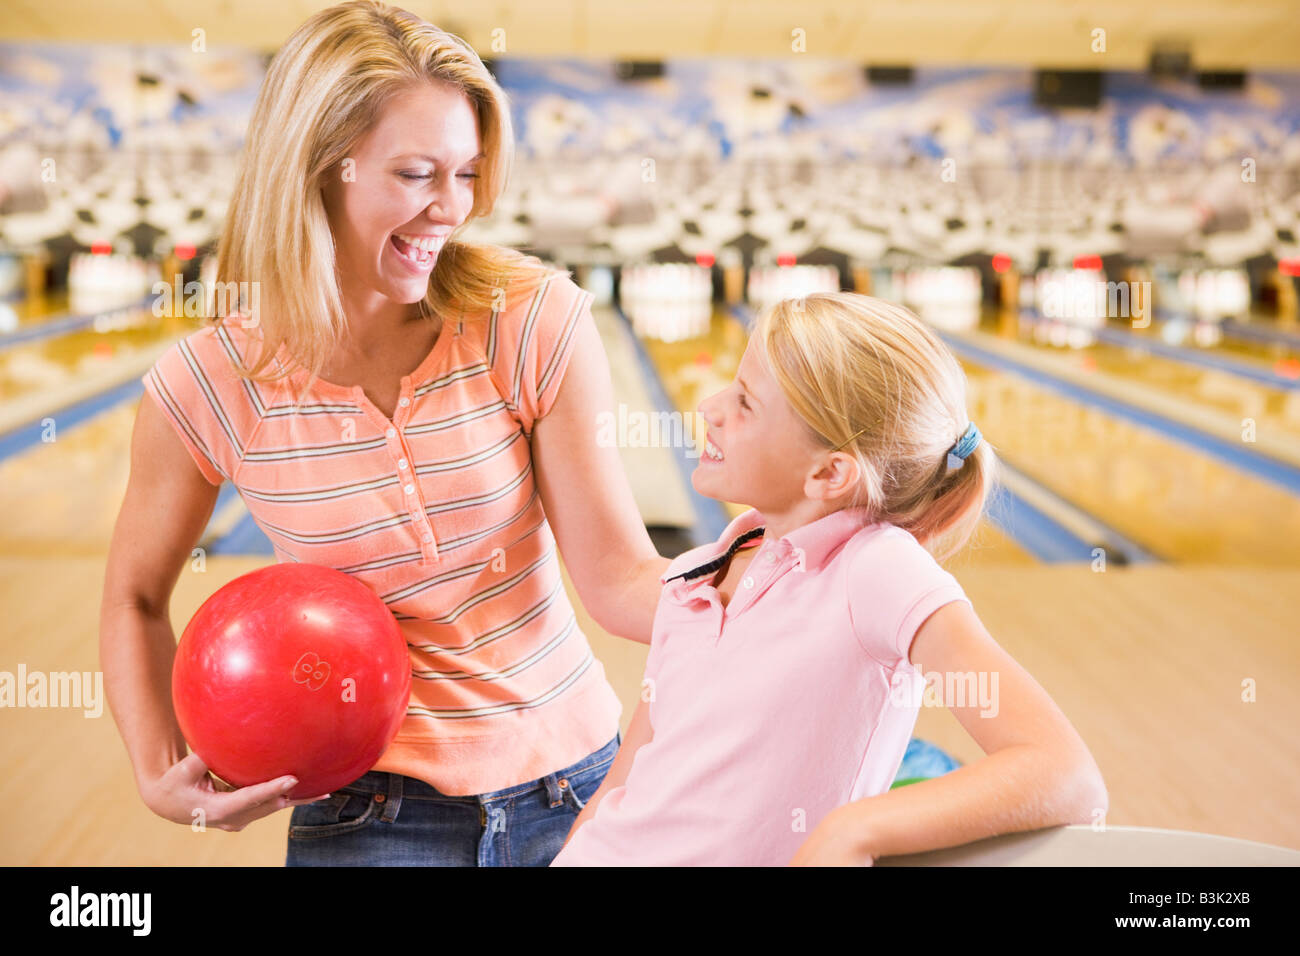 Woman and young girl in bowling alley holding ball and smiling Stock Photo